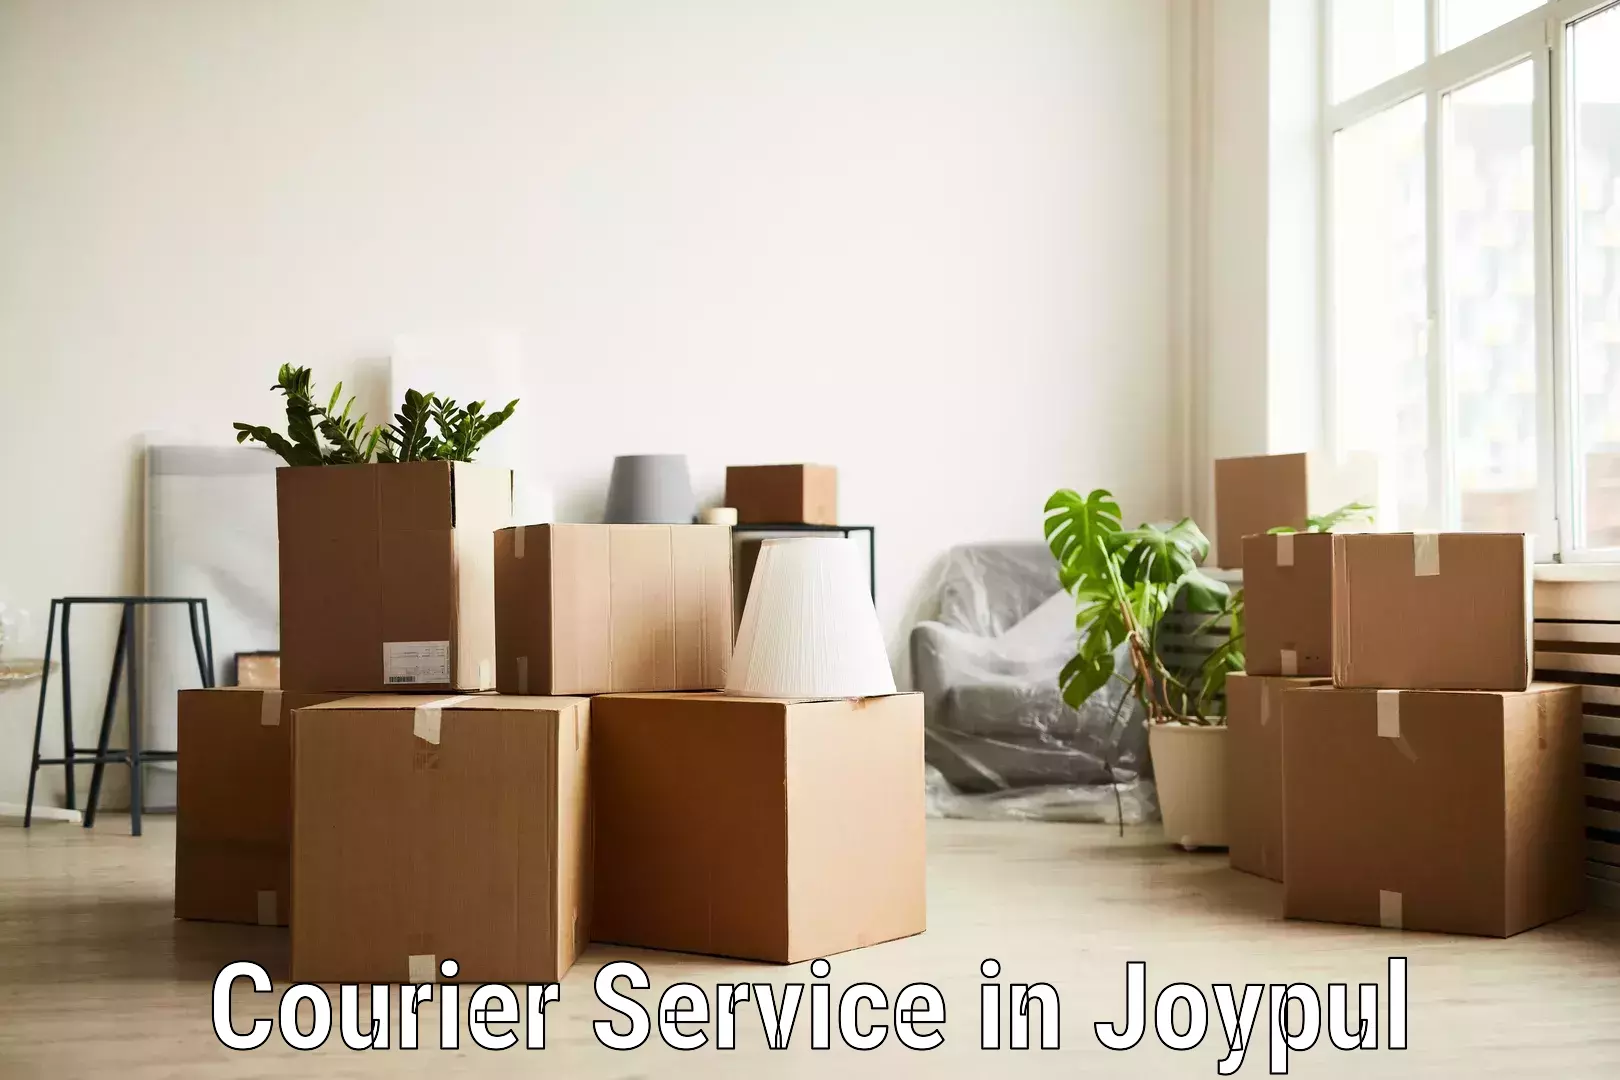 Cash on delivery service in Joypul